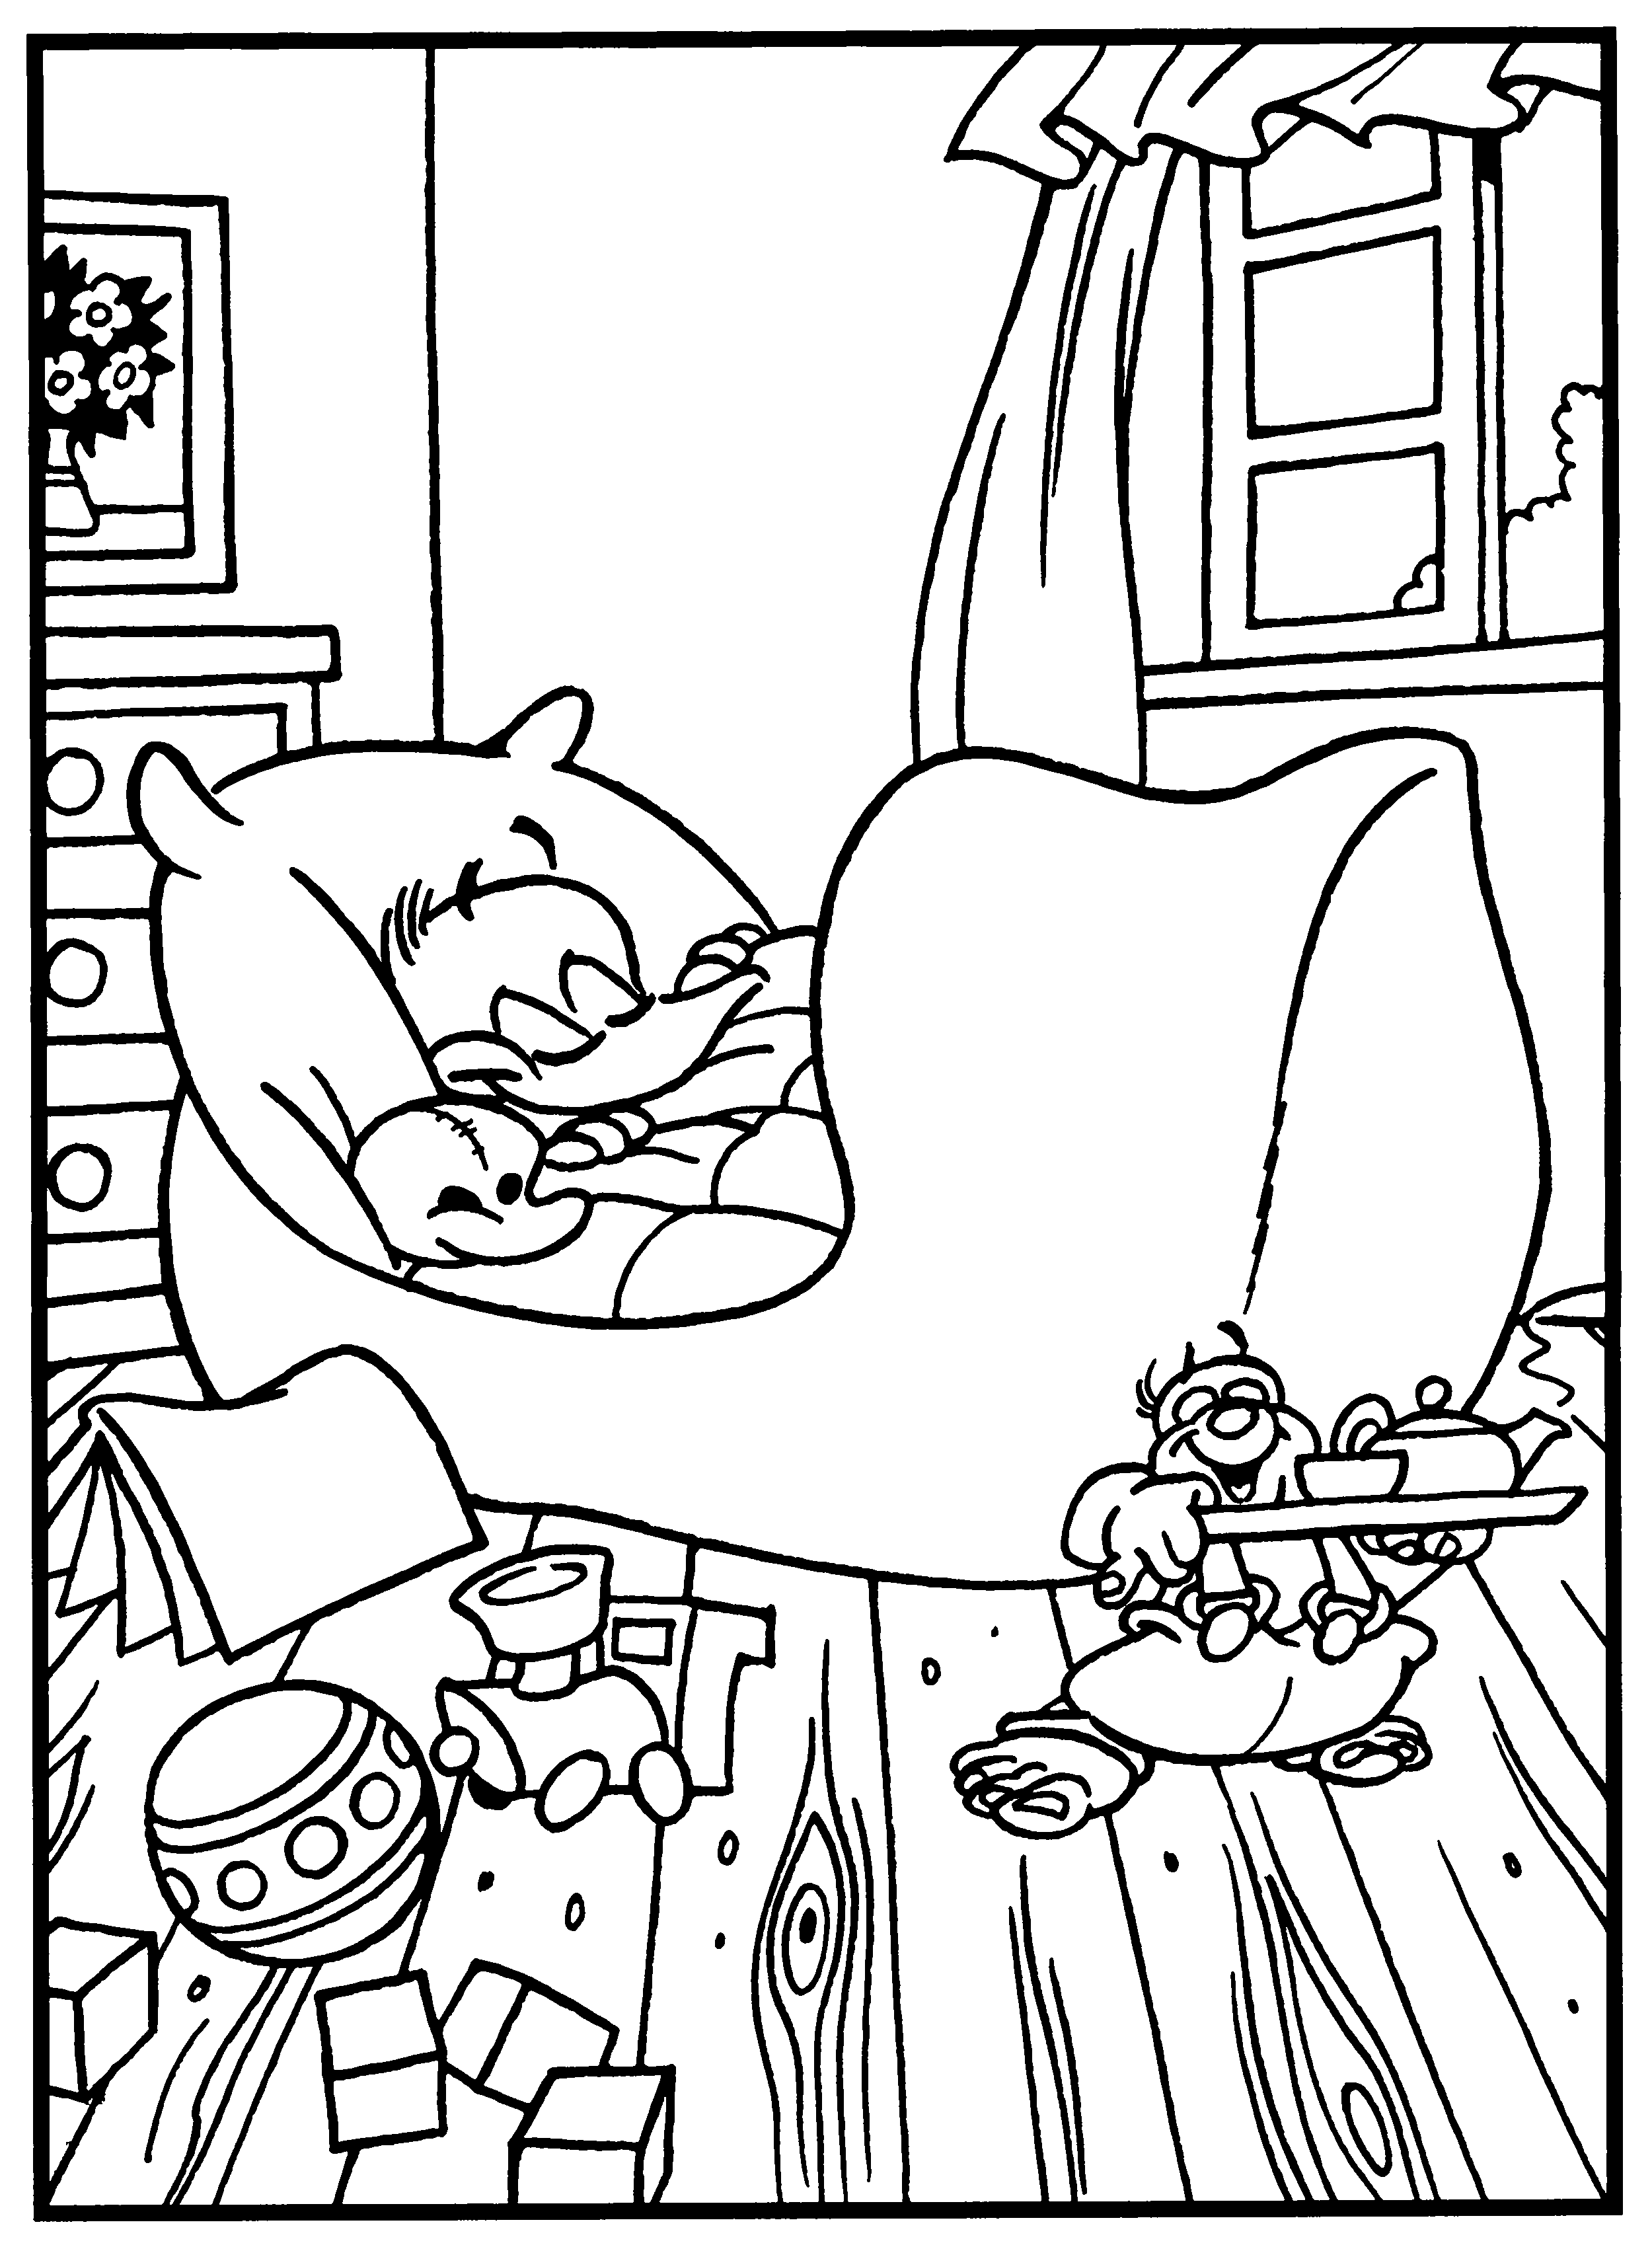 Alfred j kwak Coloring Pages